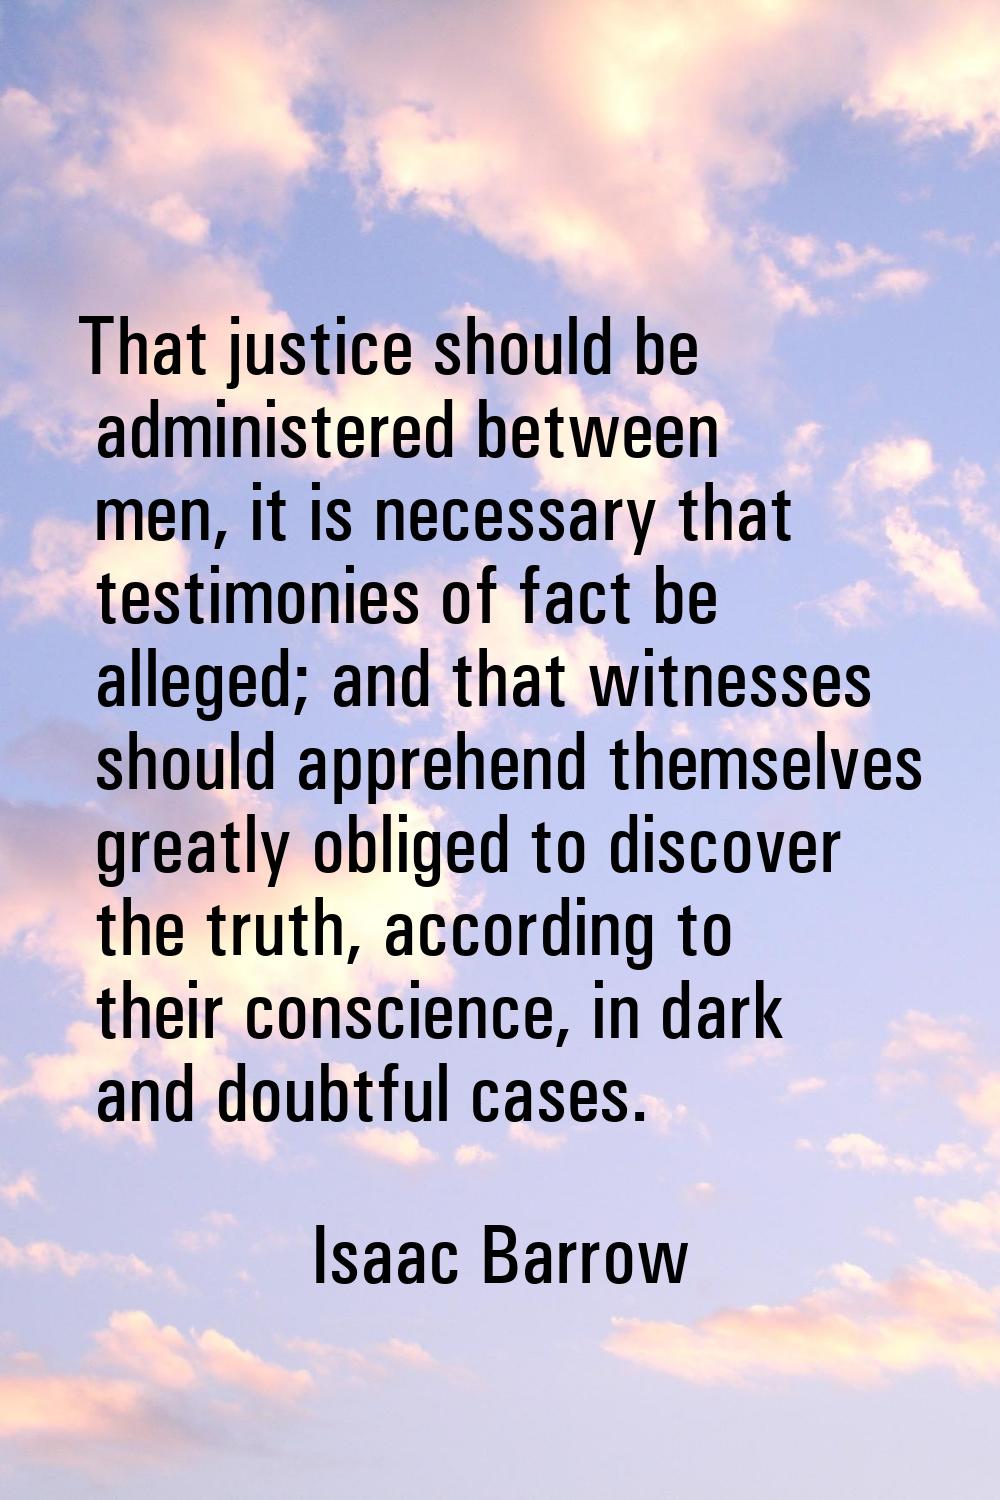 That justice should be administered between men, it is necessary that testimonies of fact be allege